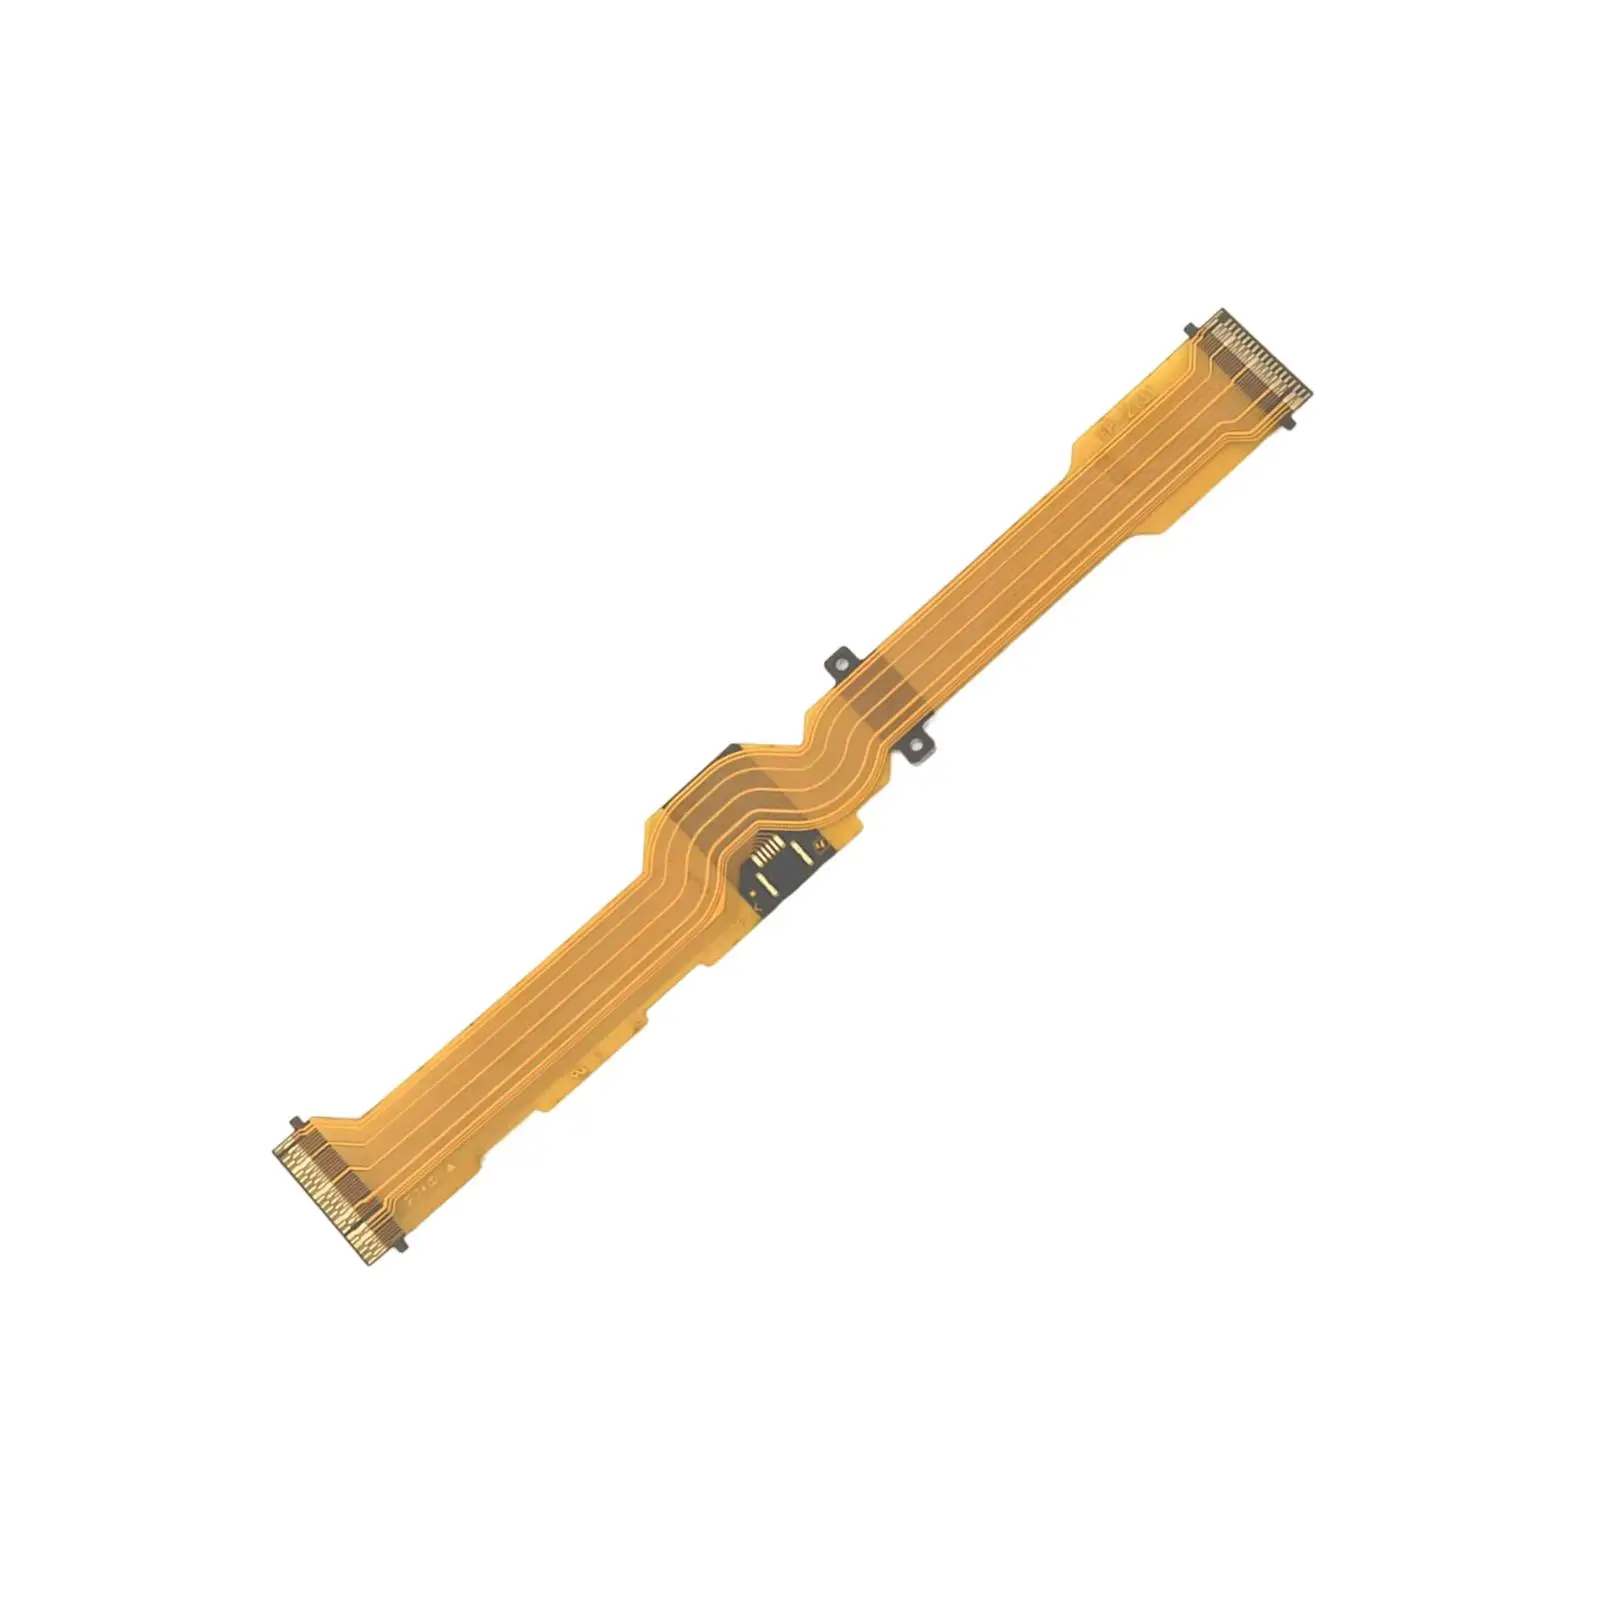 Digital Camera LCD Display Flex Cable for Dsc HX300 HX400 Components Unit Assembly